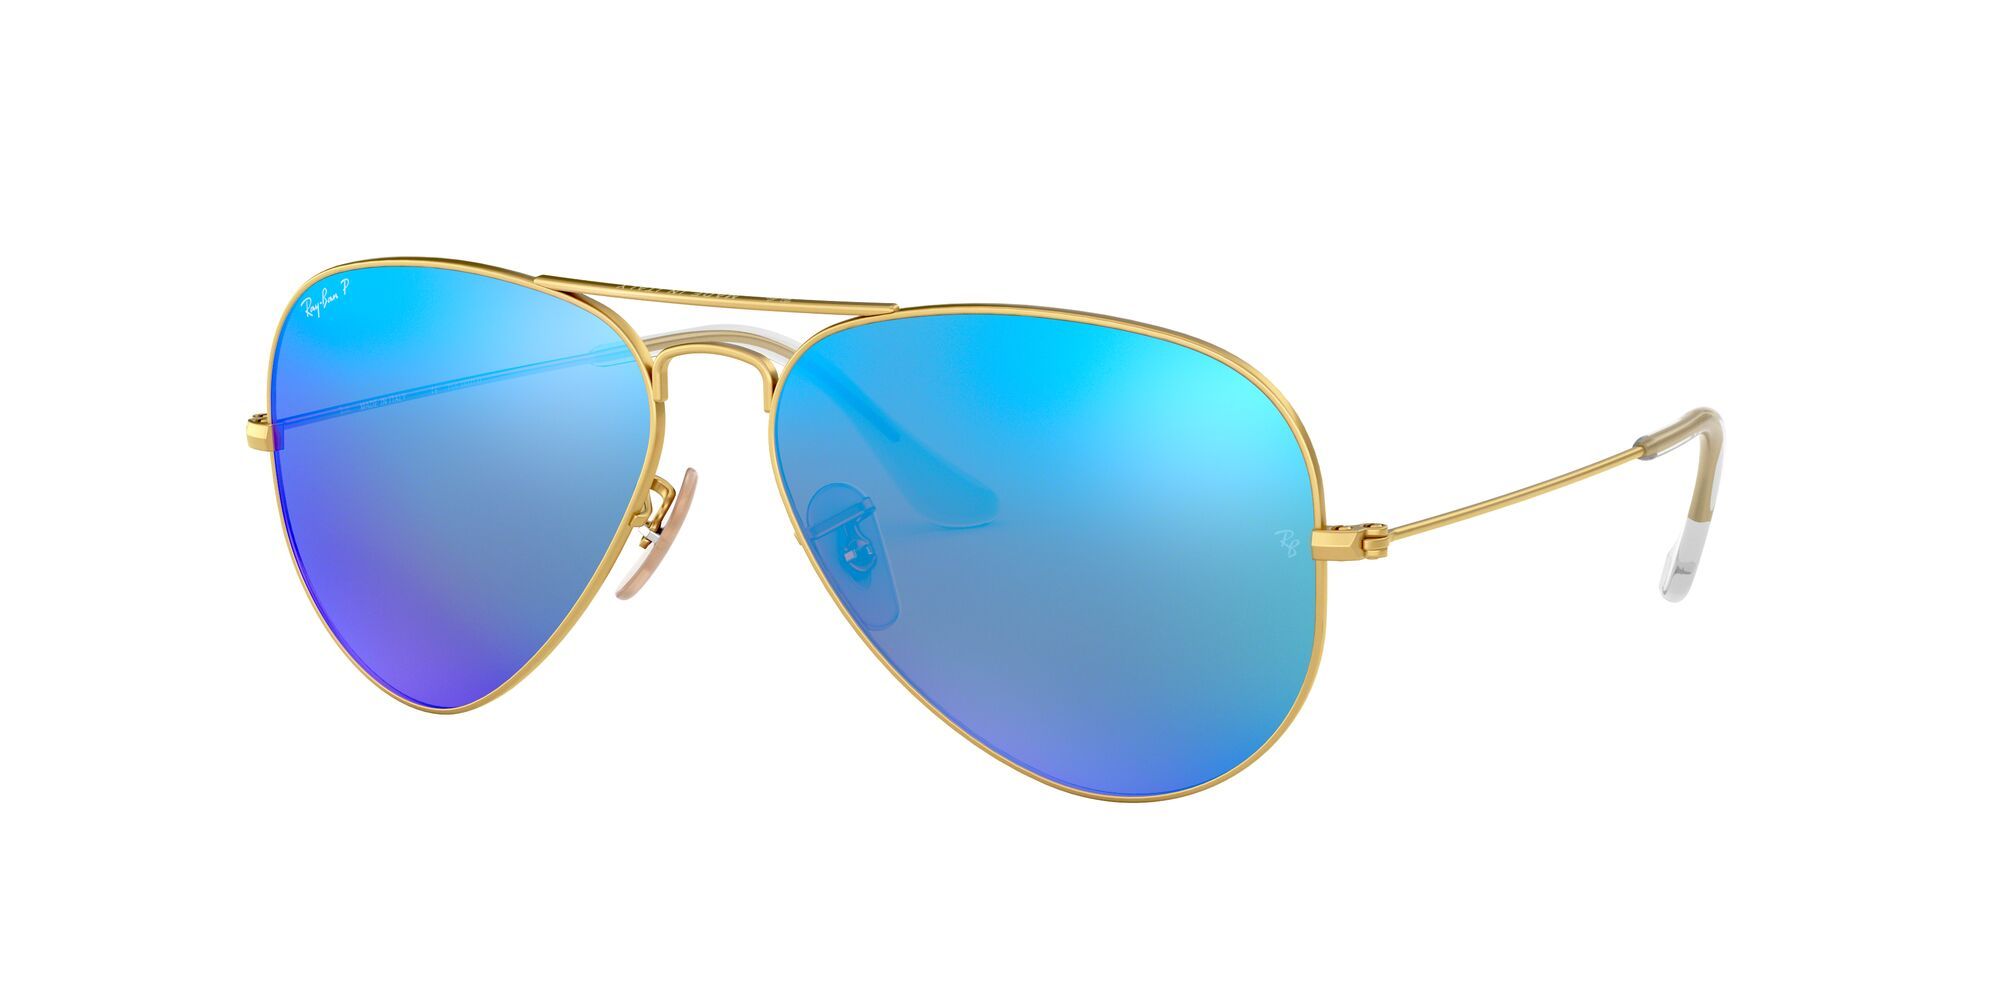 Buy Imperial Club Unisex Casual Double Gradient Sky Blue Aviator Sunglasses  (wy005) at Amazon.in